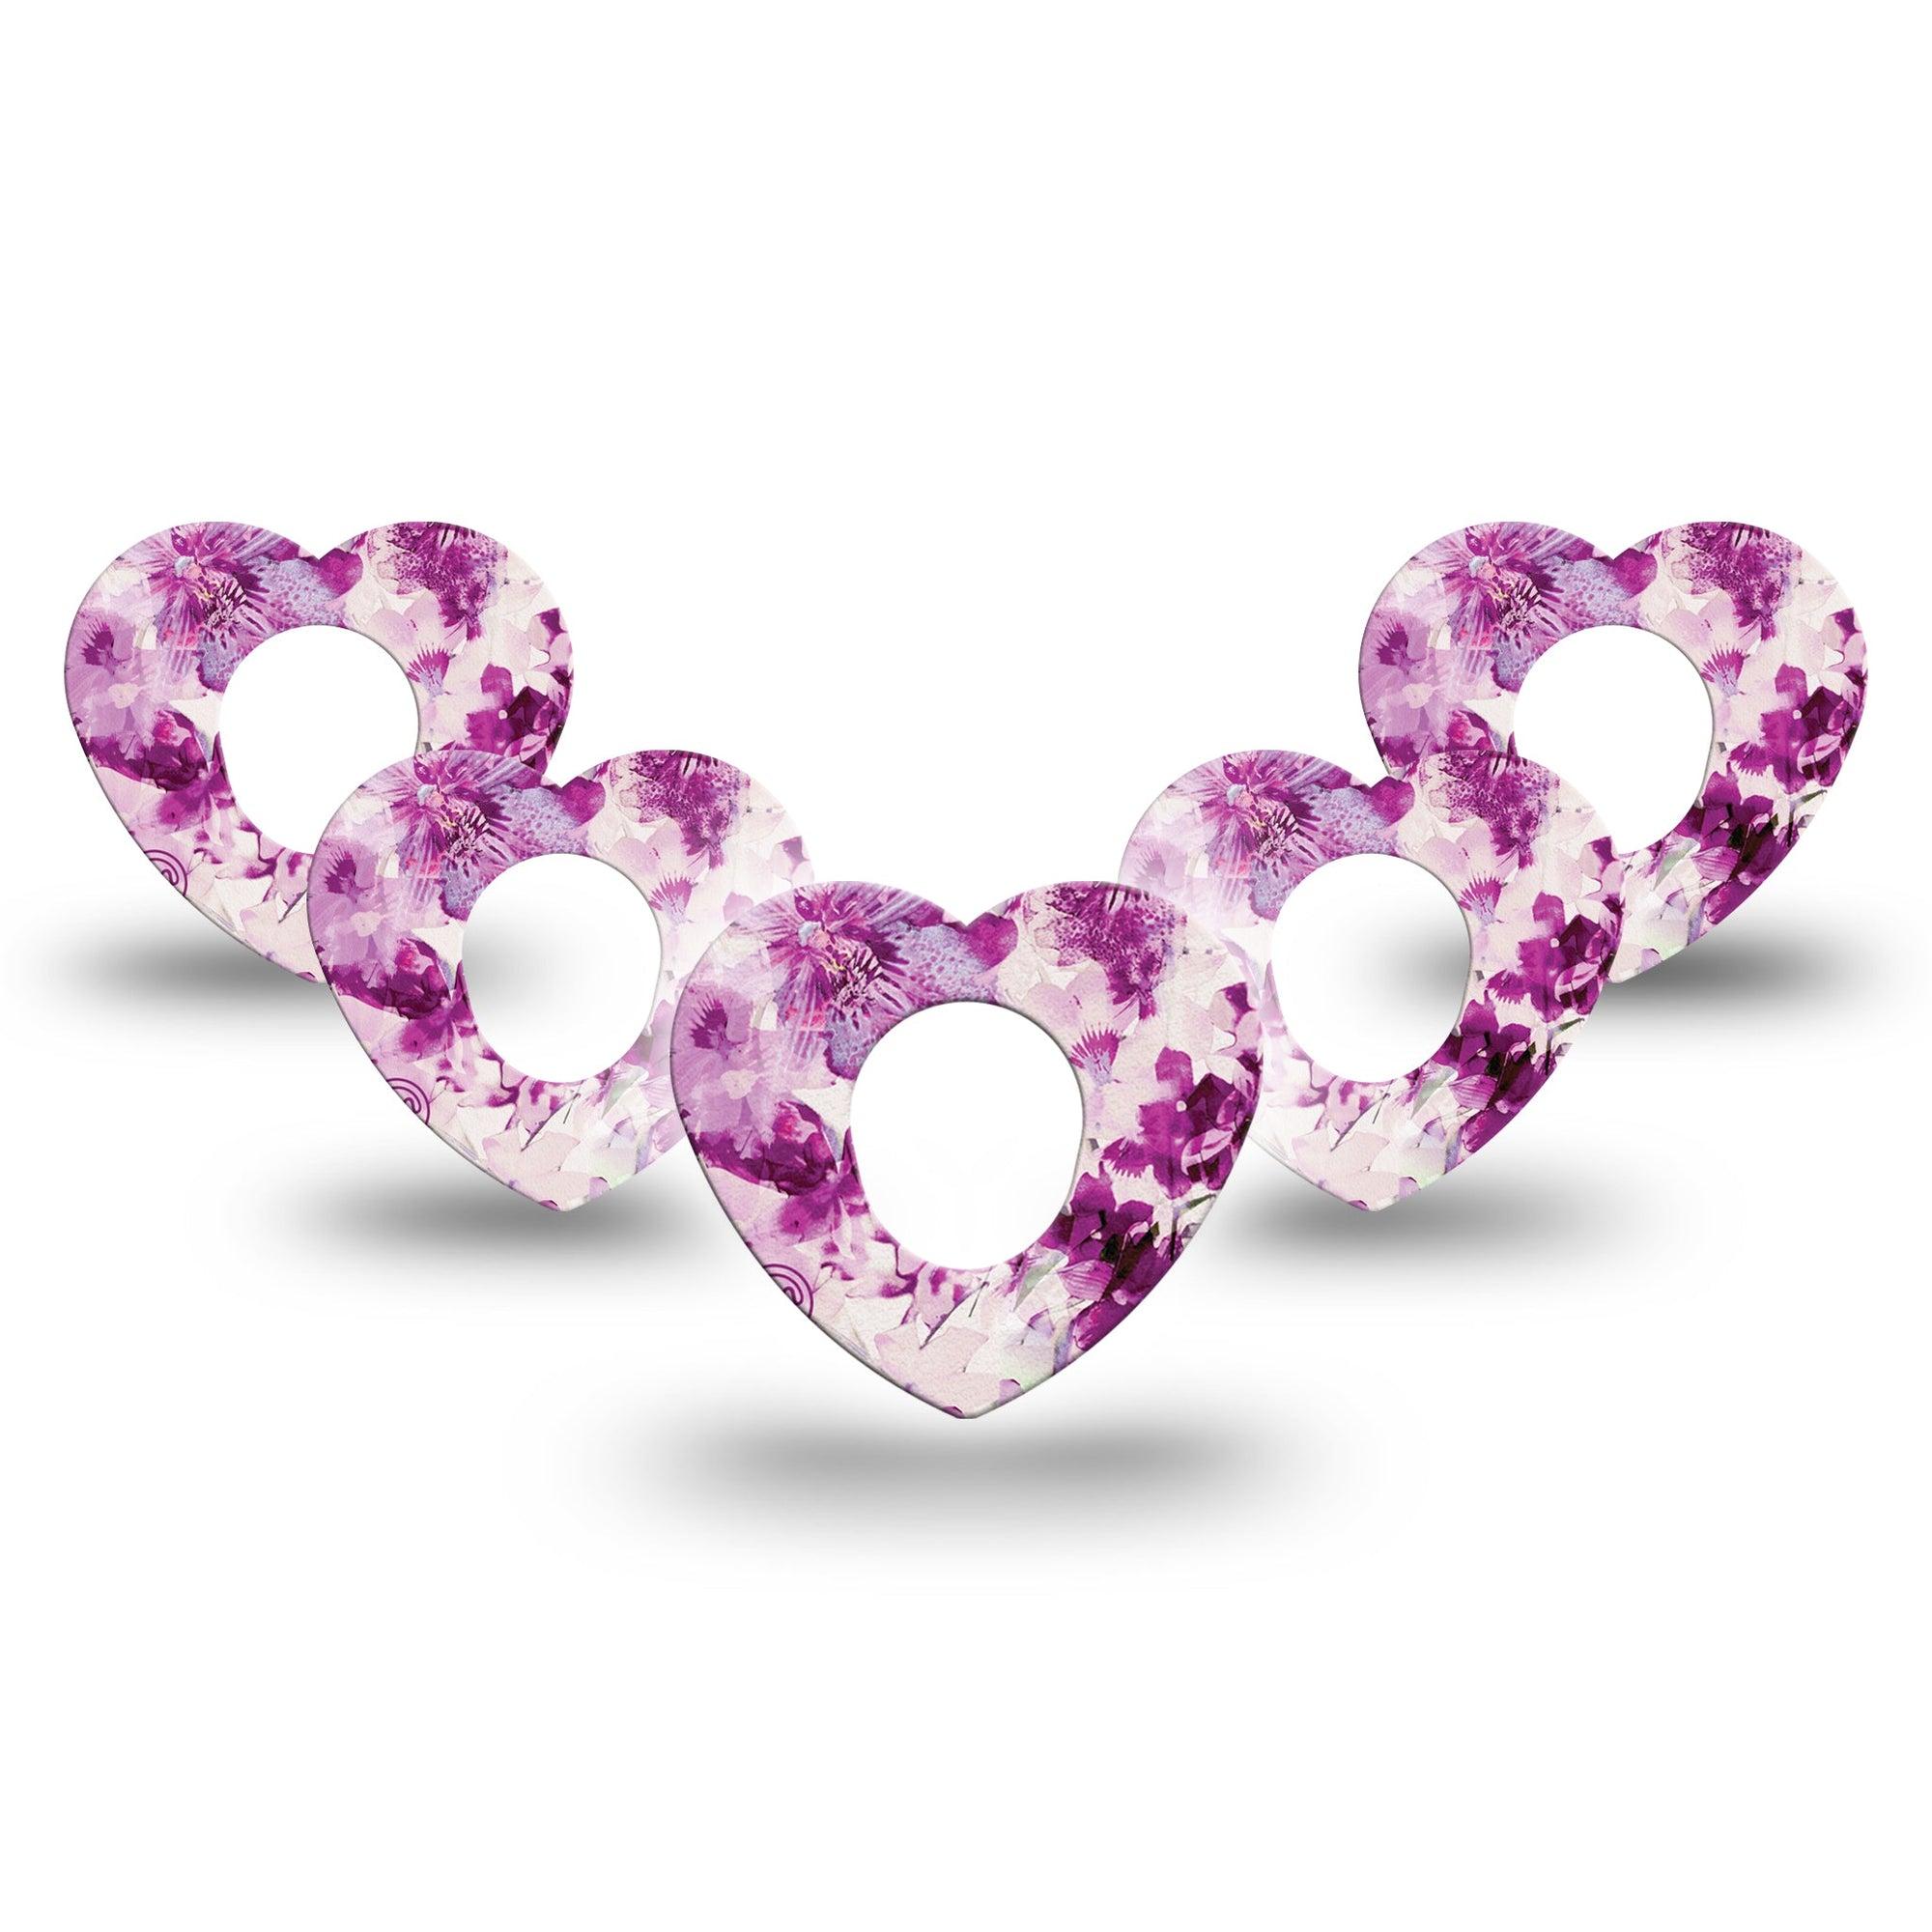 ExpressionMed Violet Orchids Heart Dexcom G7 Tape, 5-Pack, Ornamental Flowers Inspired, CGM Overlay Patch Design